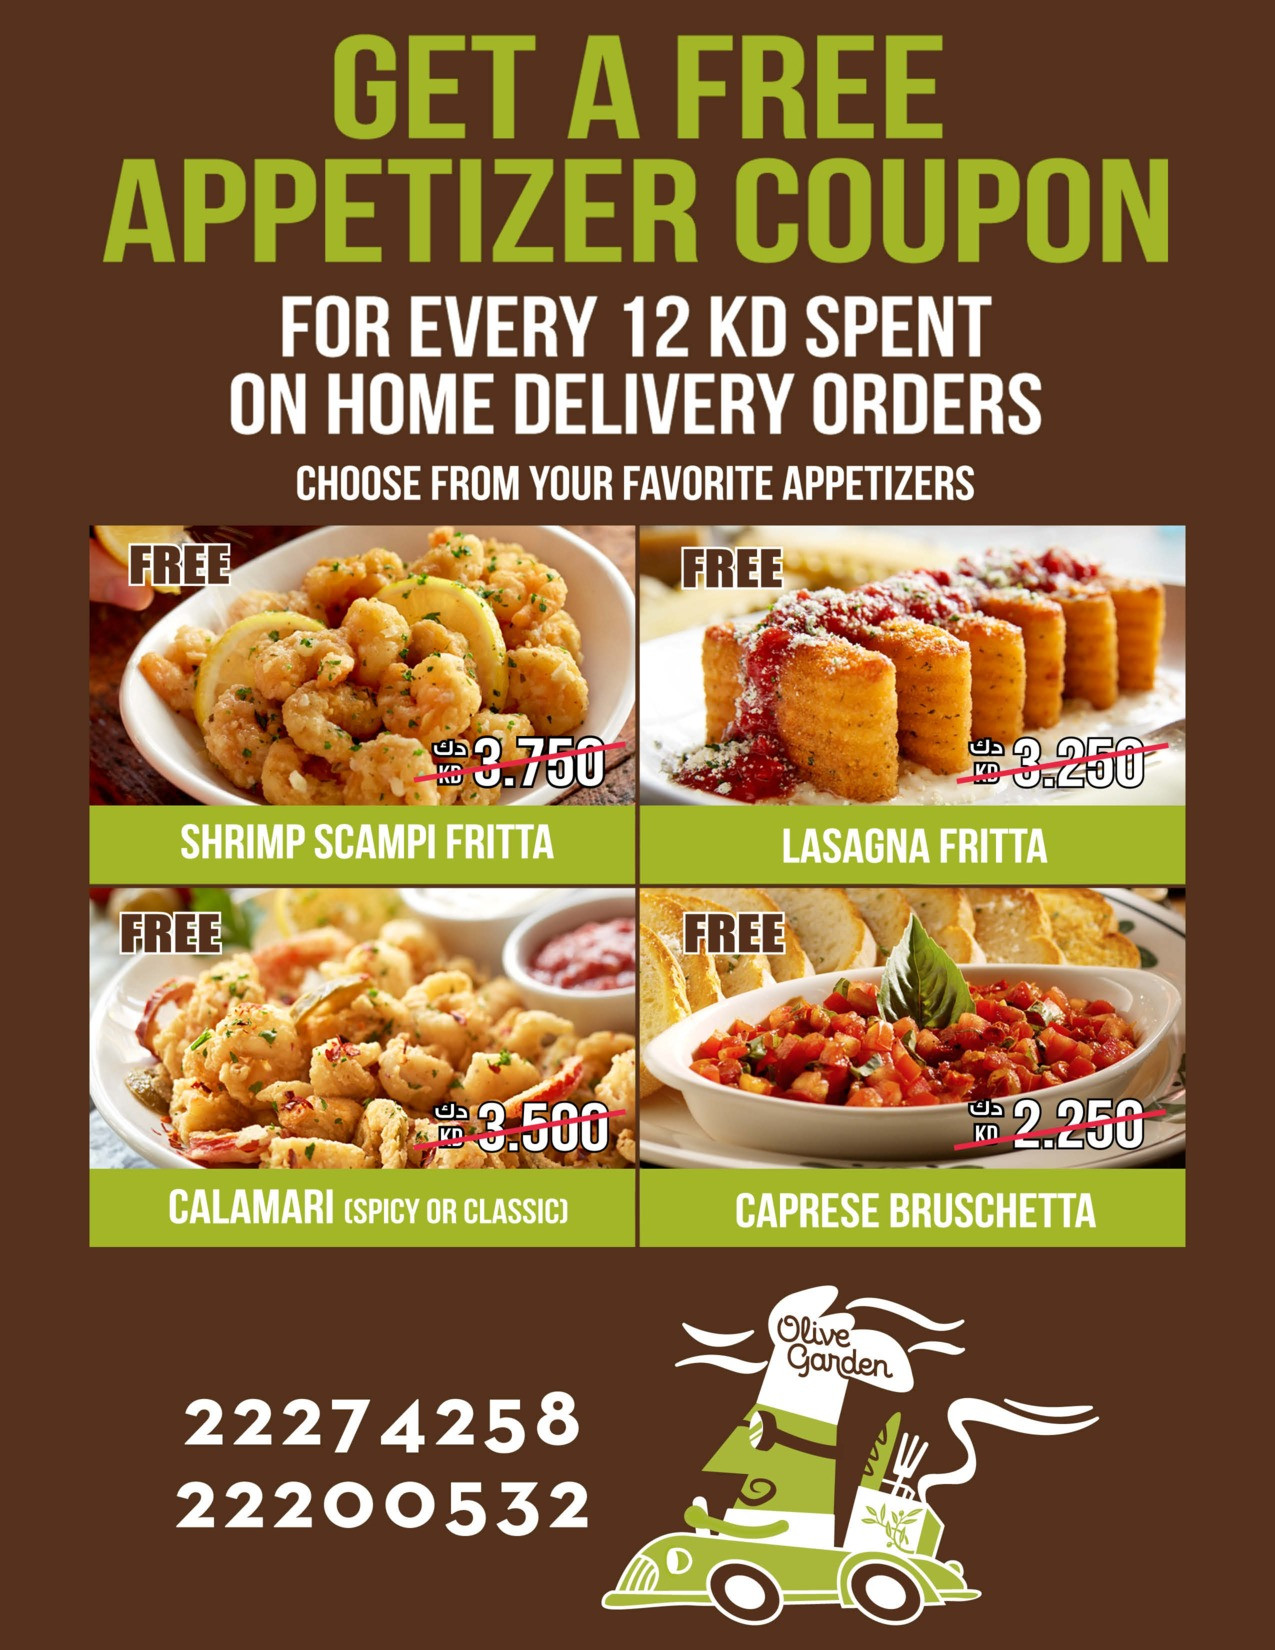 Olive Garden Free Appetizer Coupon
 Get A Free Appetizer Coupon